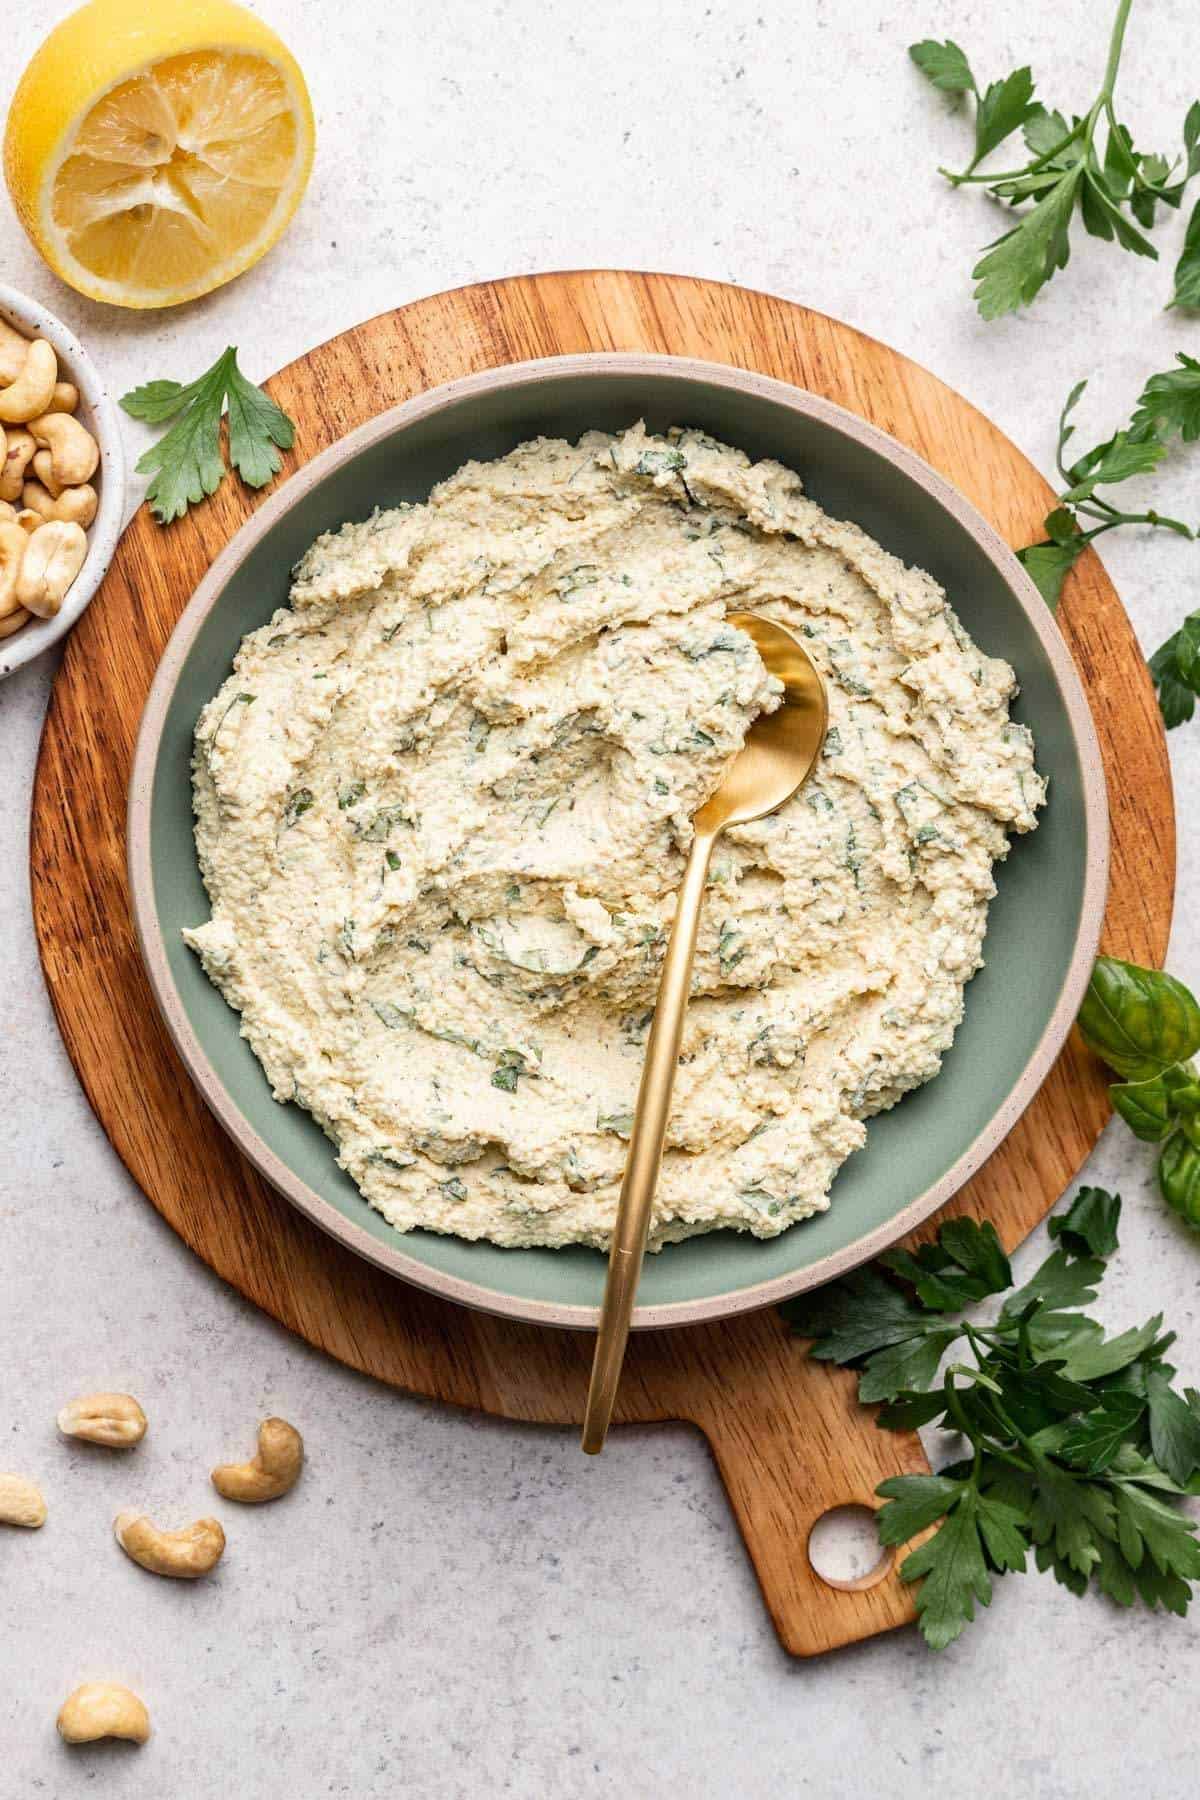 Cashew ricotta in blue serving bowl with gold spoon.